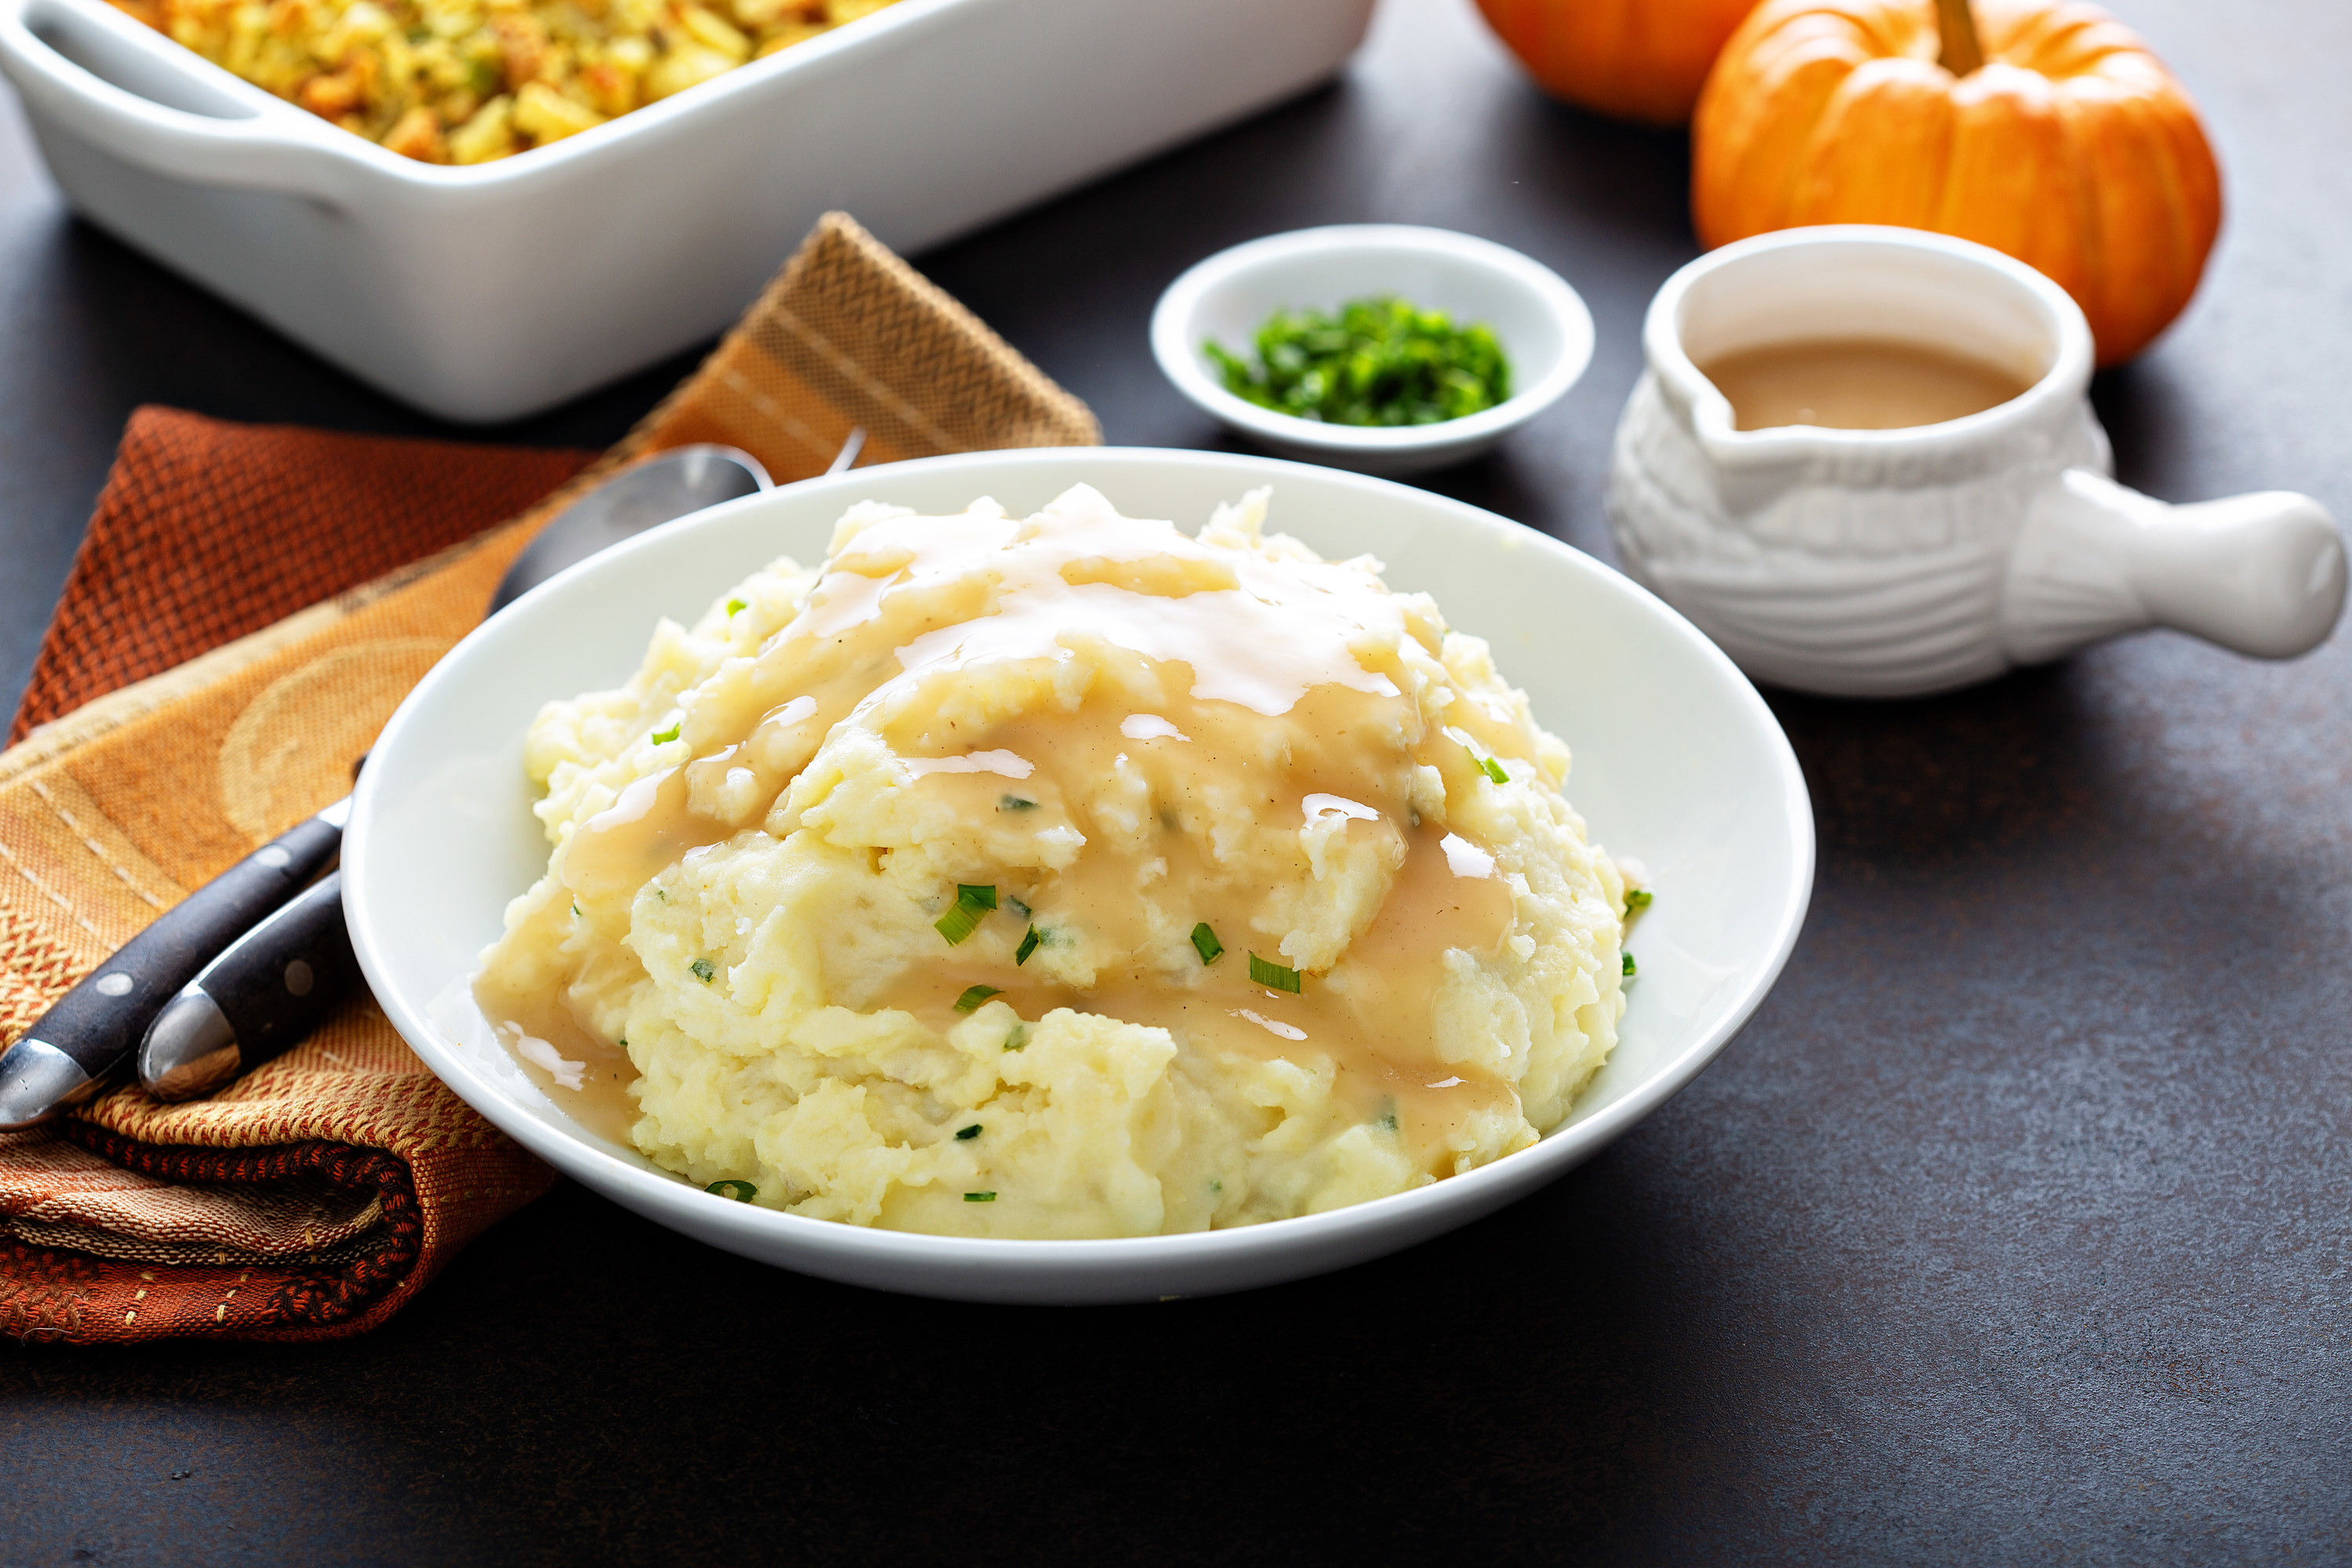 Mashed potatoes with gravy, traditional side dish for Thanksgiving